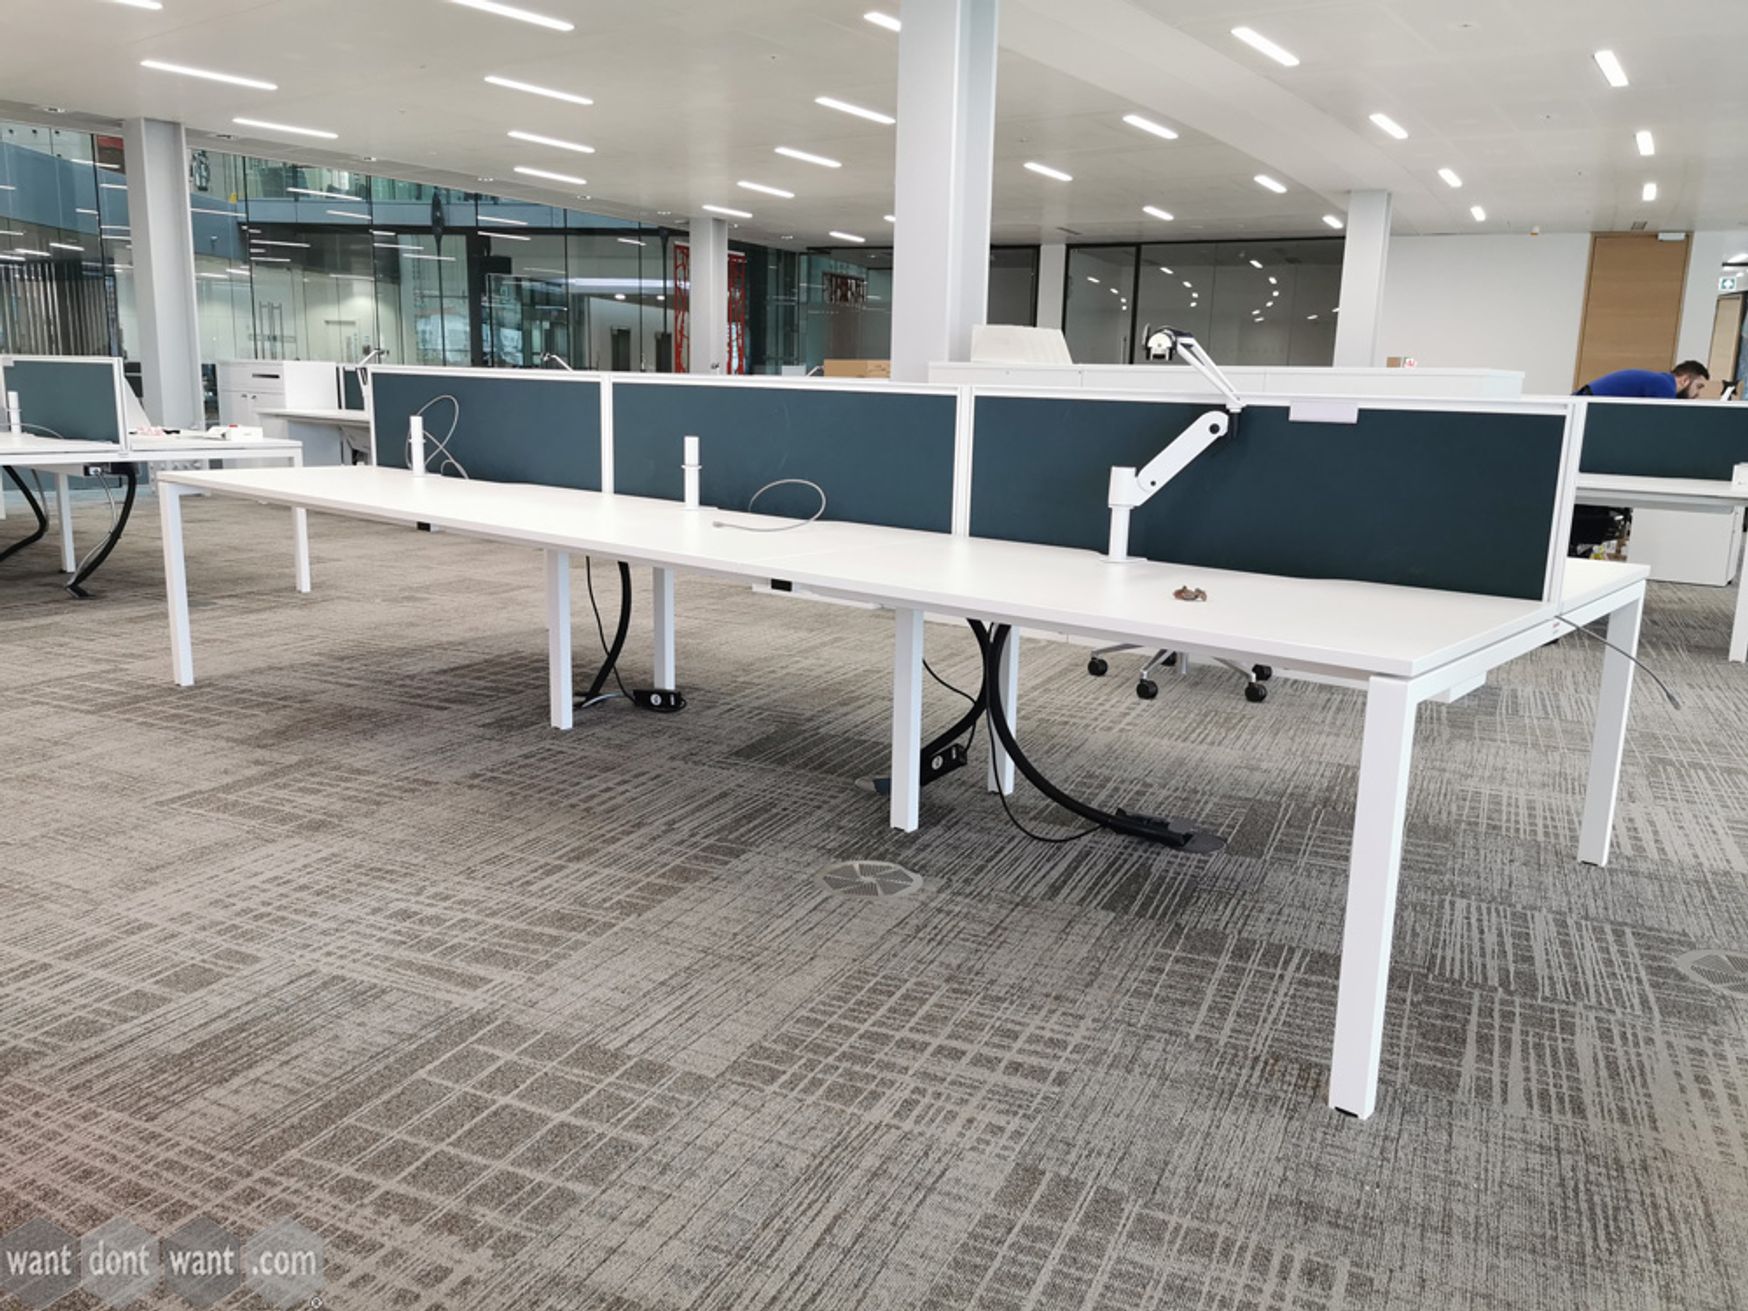 Used 'KI' 1400mm wide white bench desk positions in various configurations